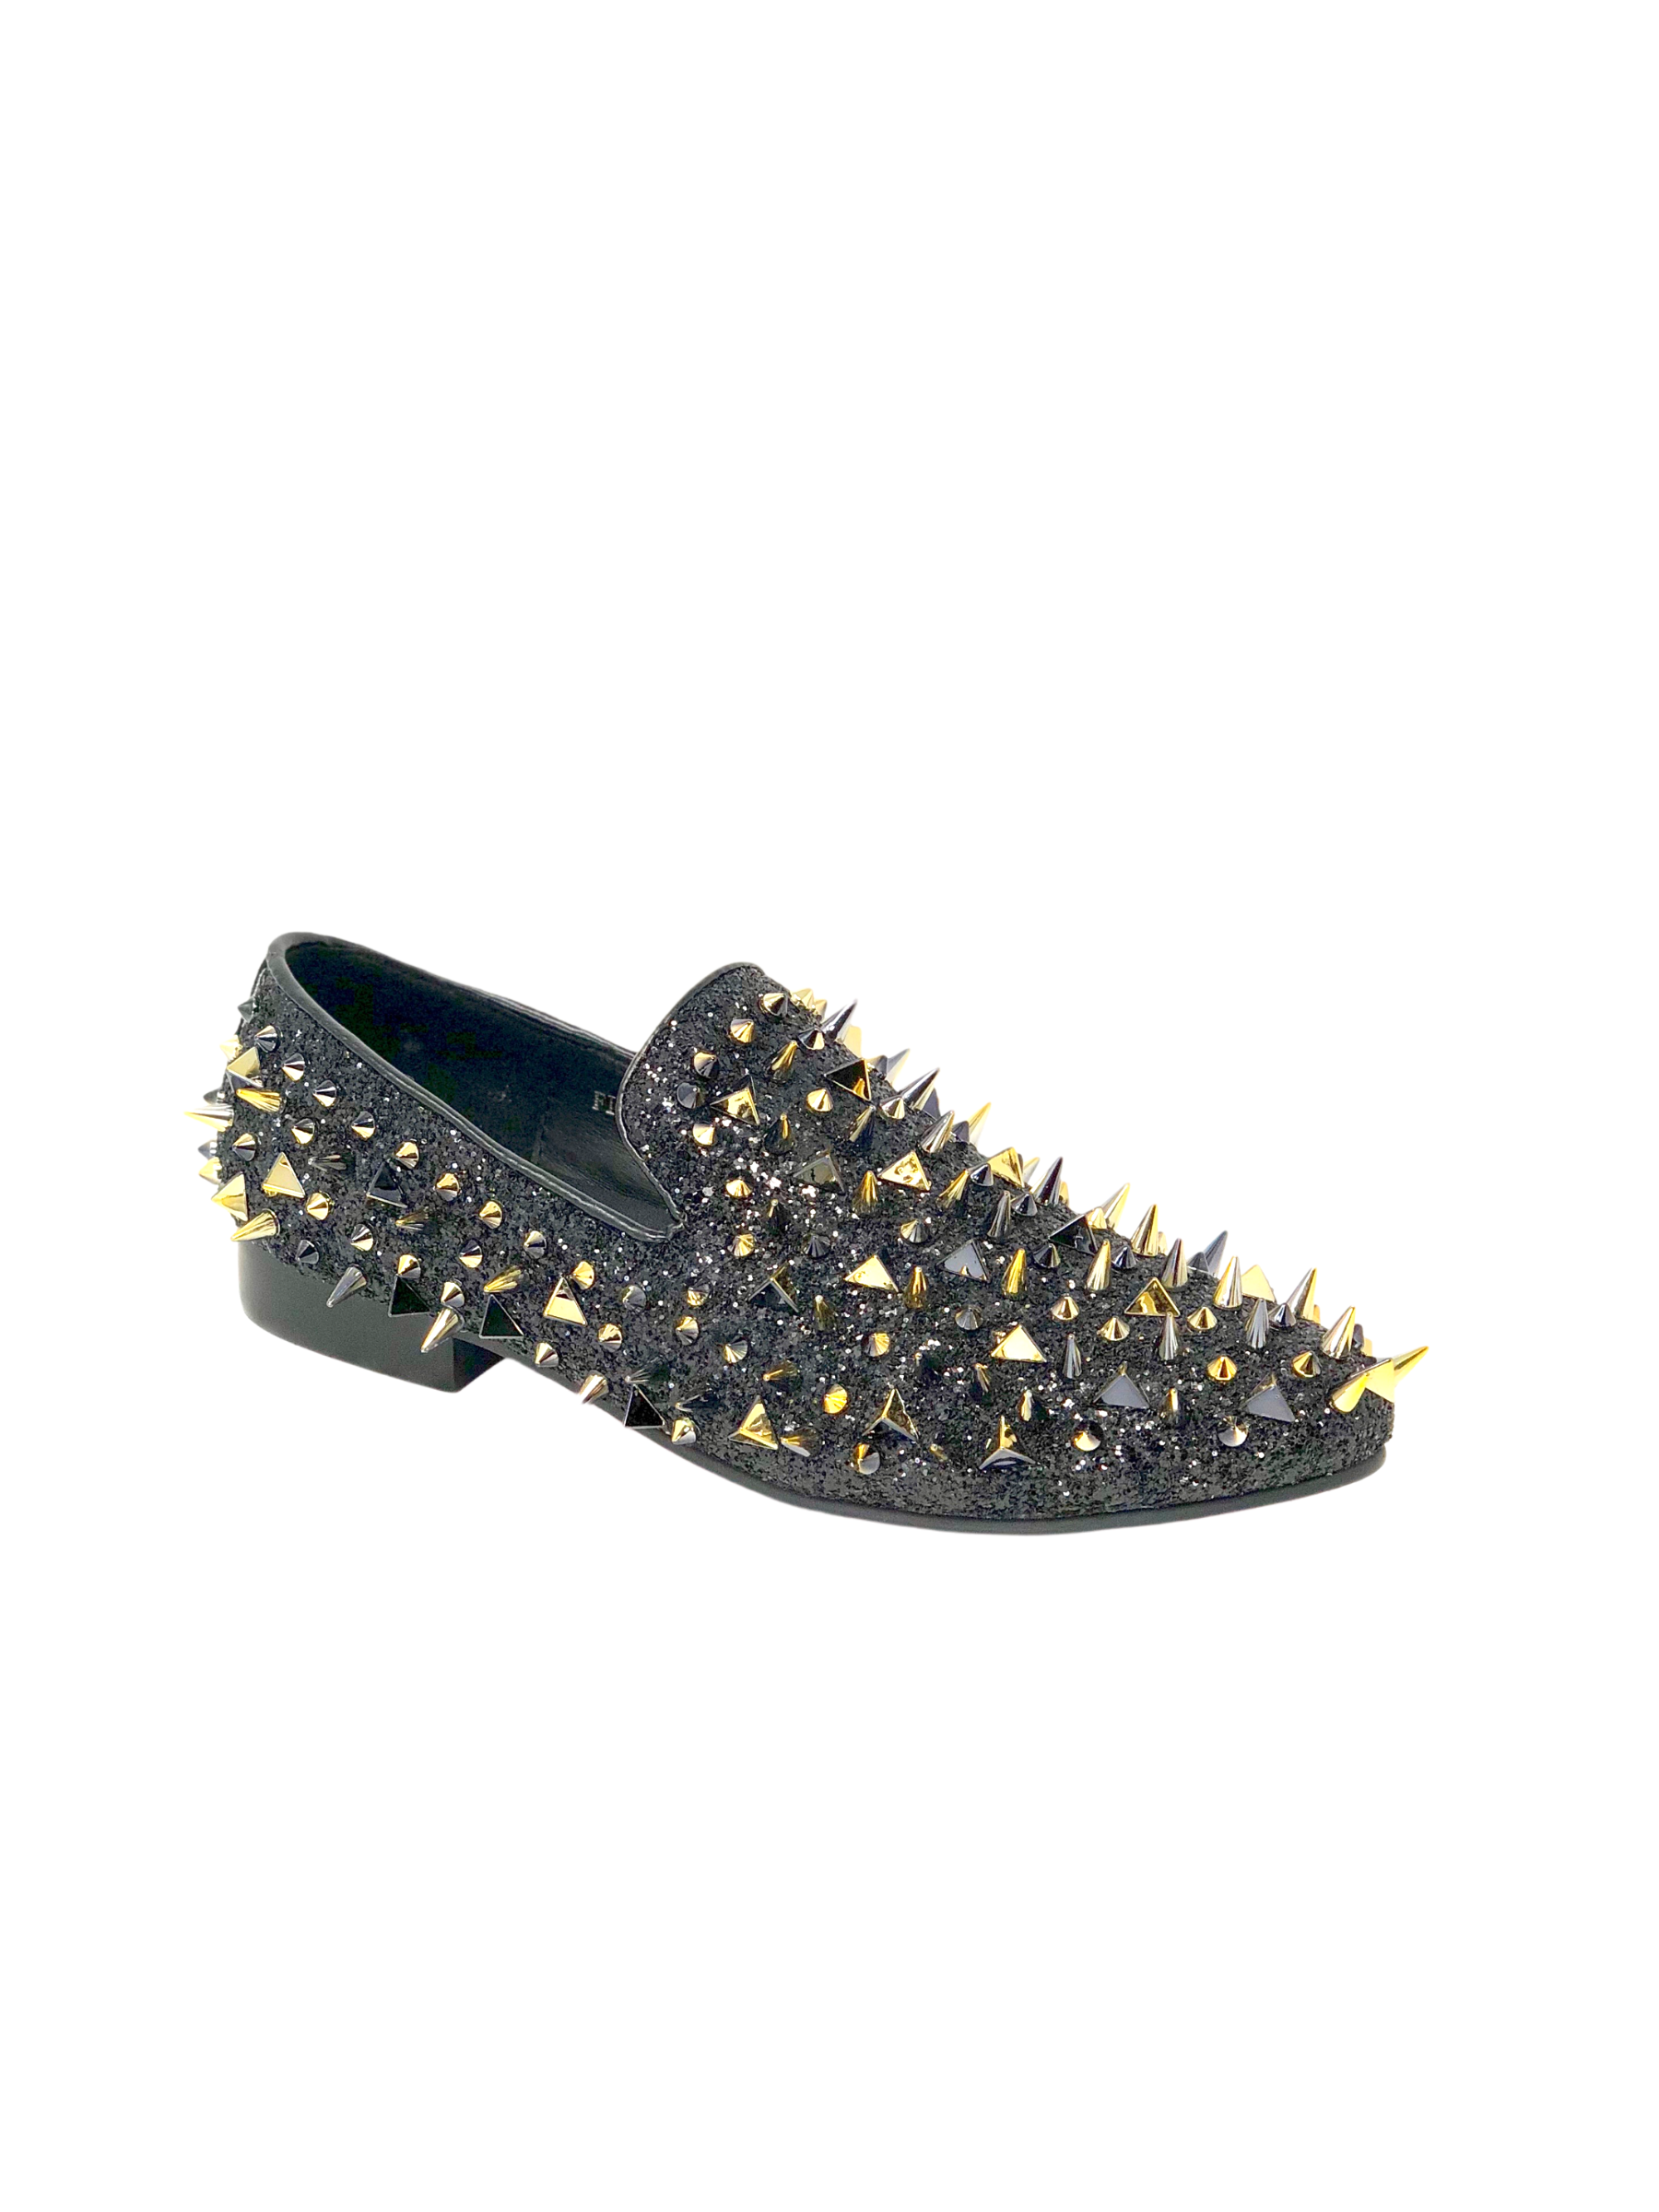 Fiesso Black Glitter Loafer with Black & Gold Spikes